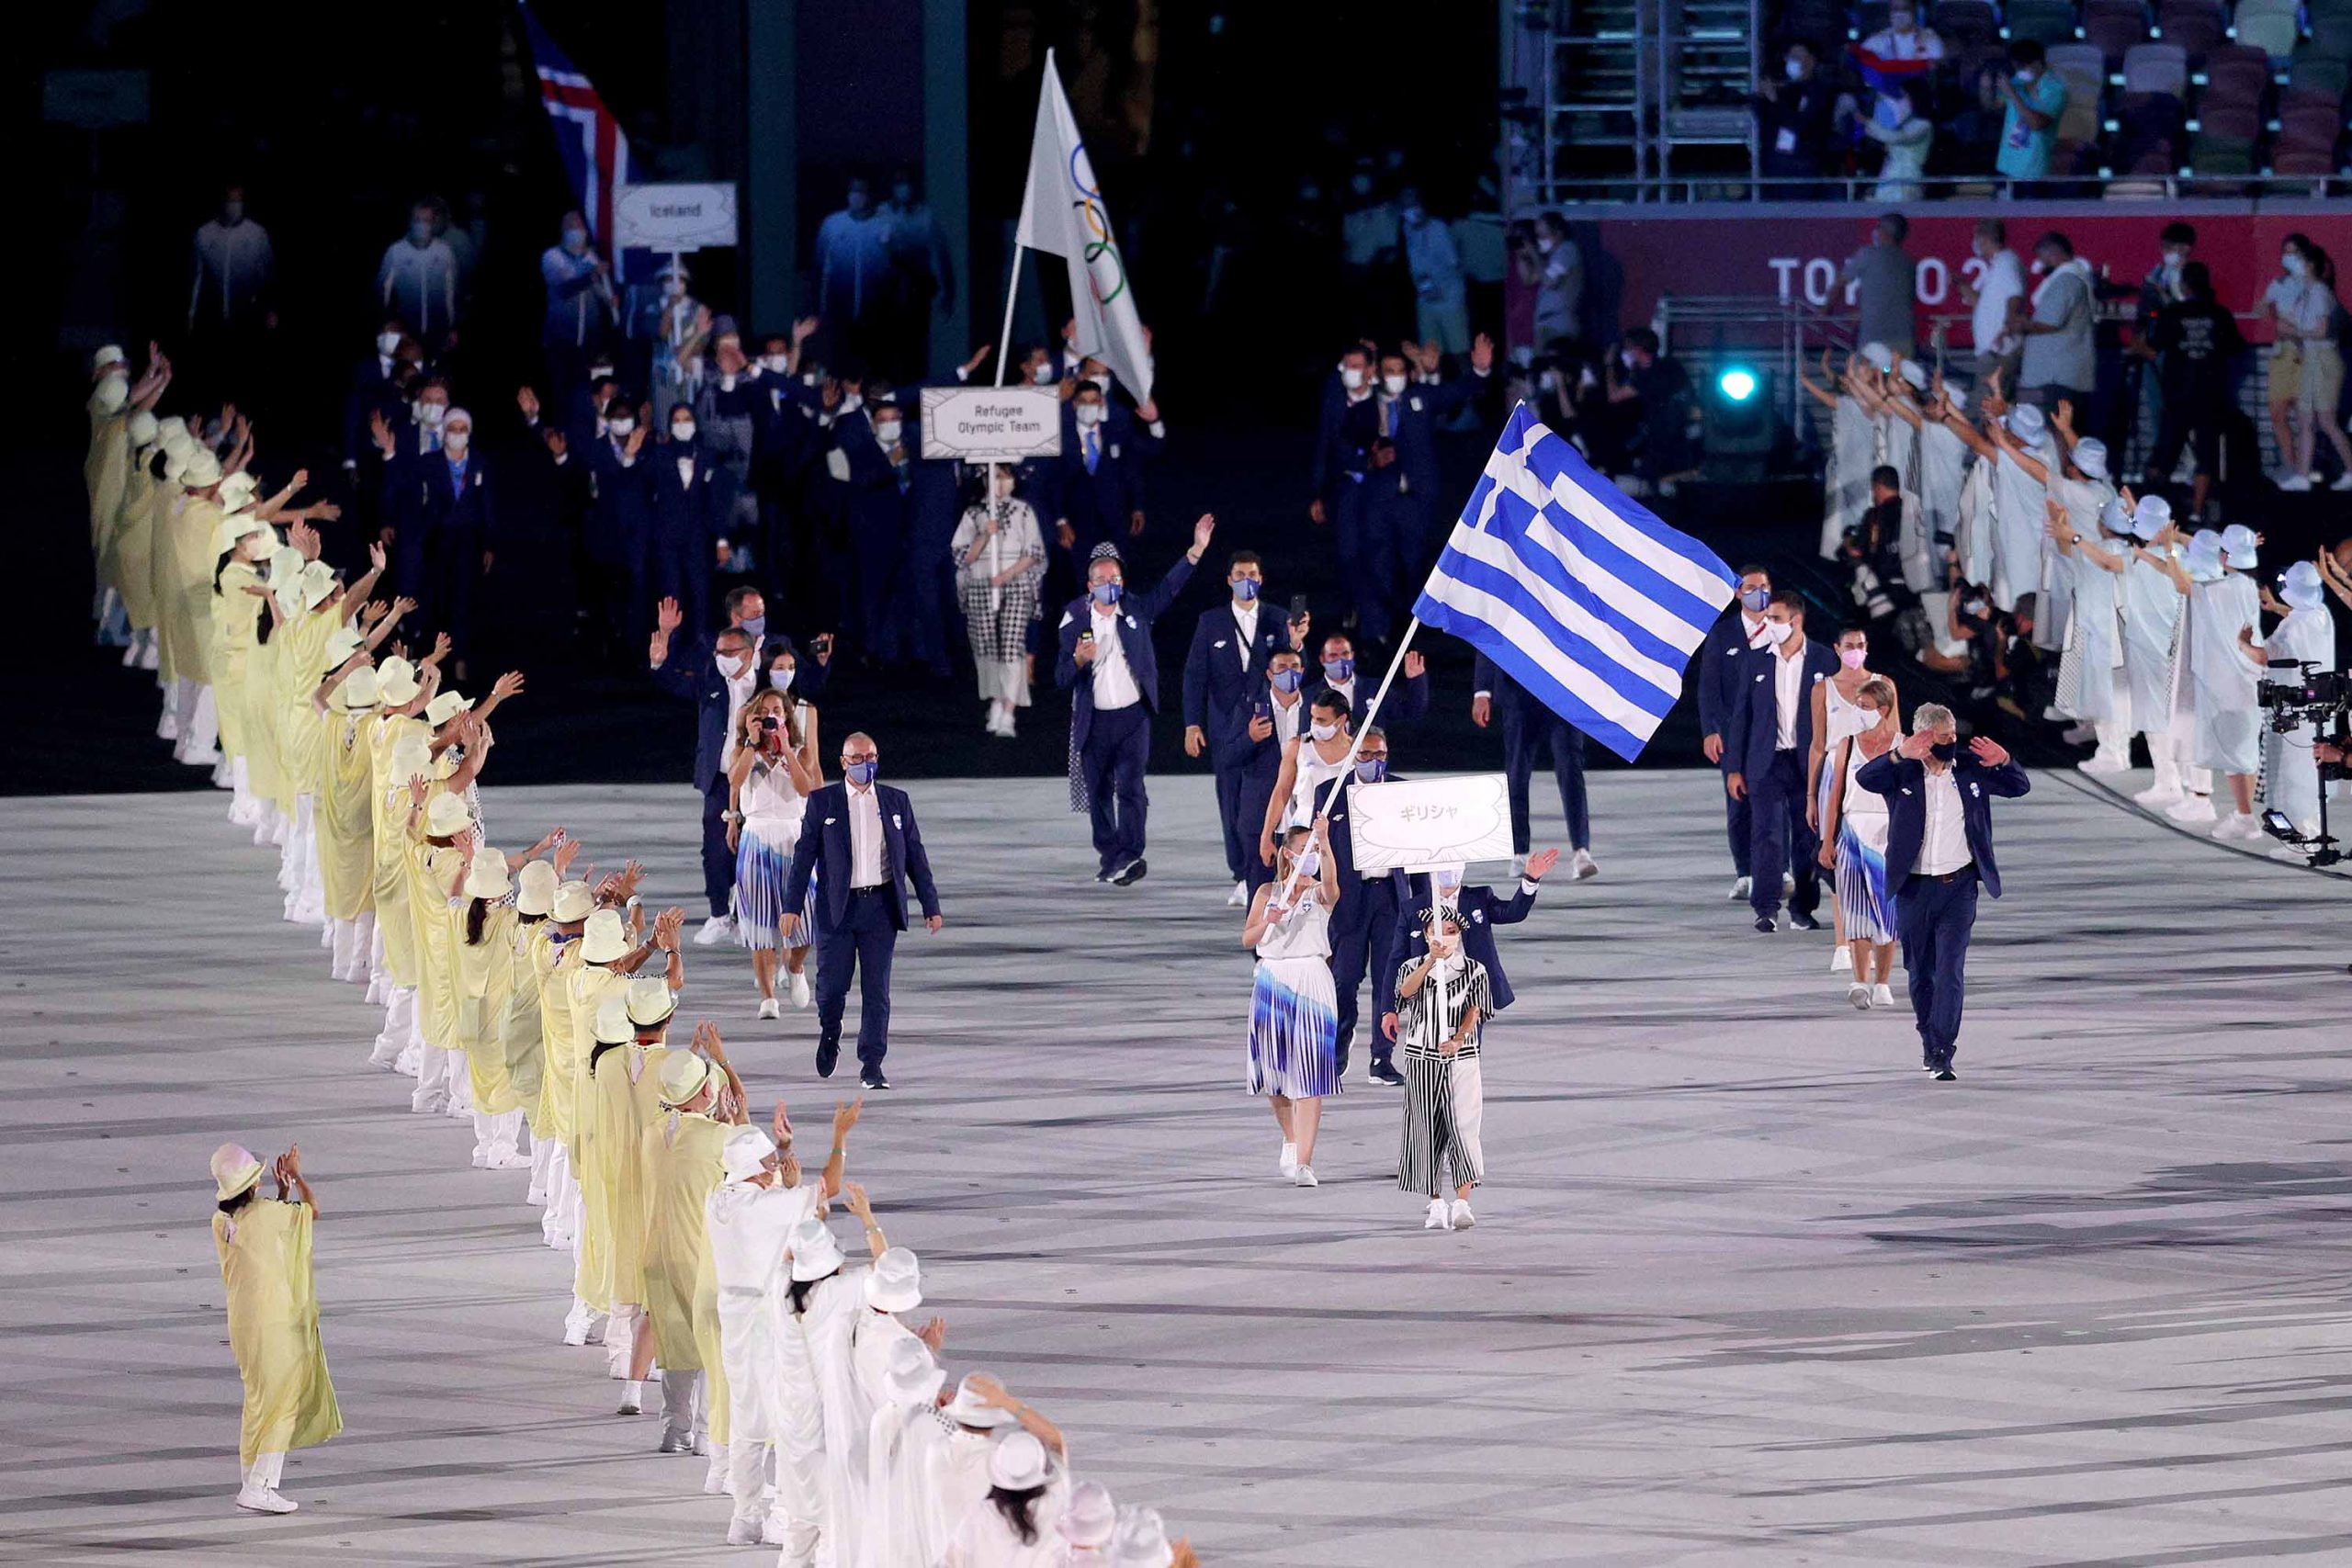 The parade of athletes is underway at the Tokyo 2020 Opening Ceremony